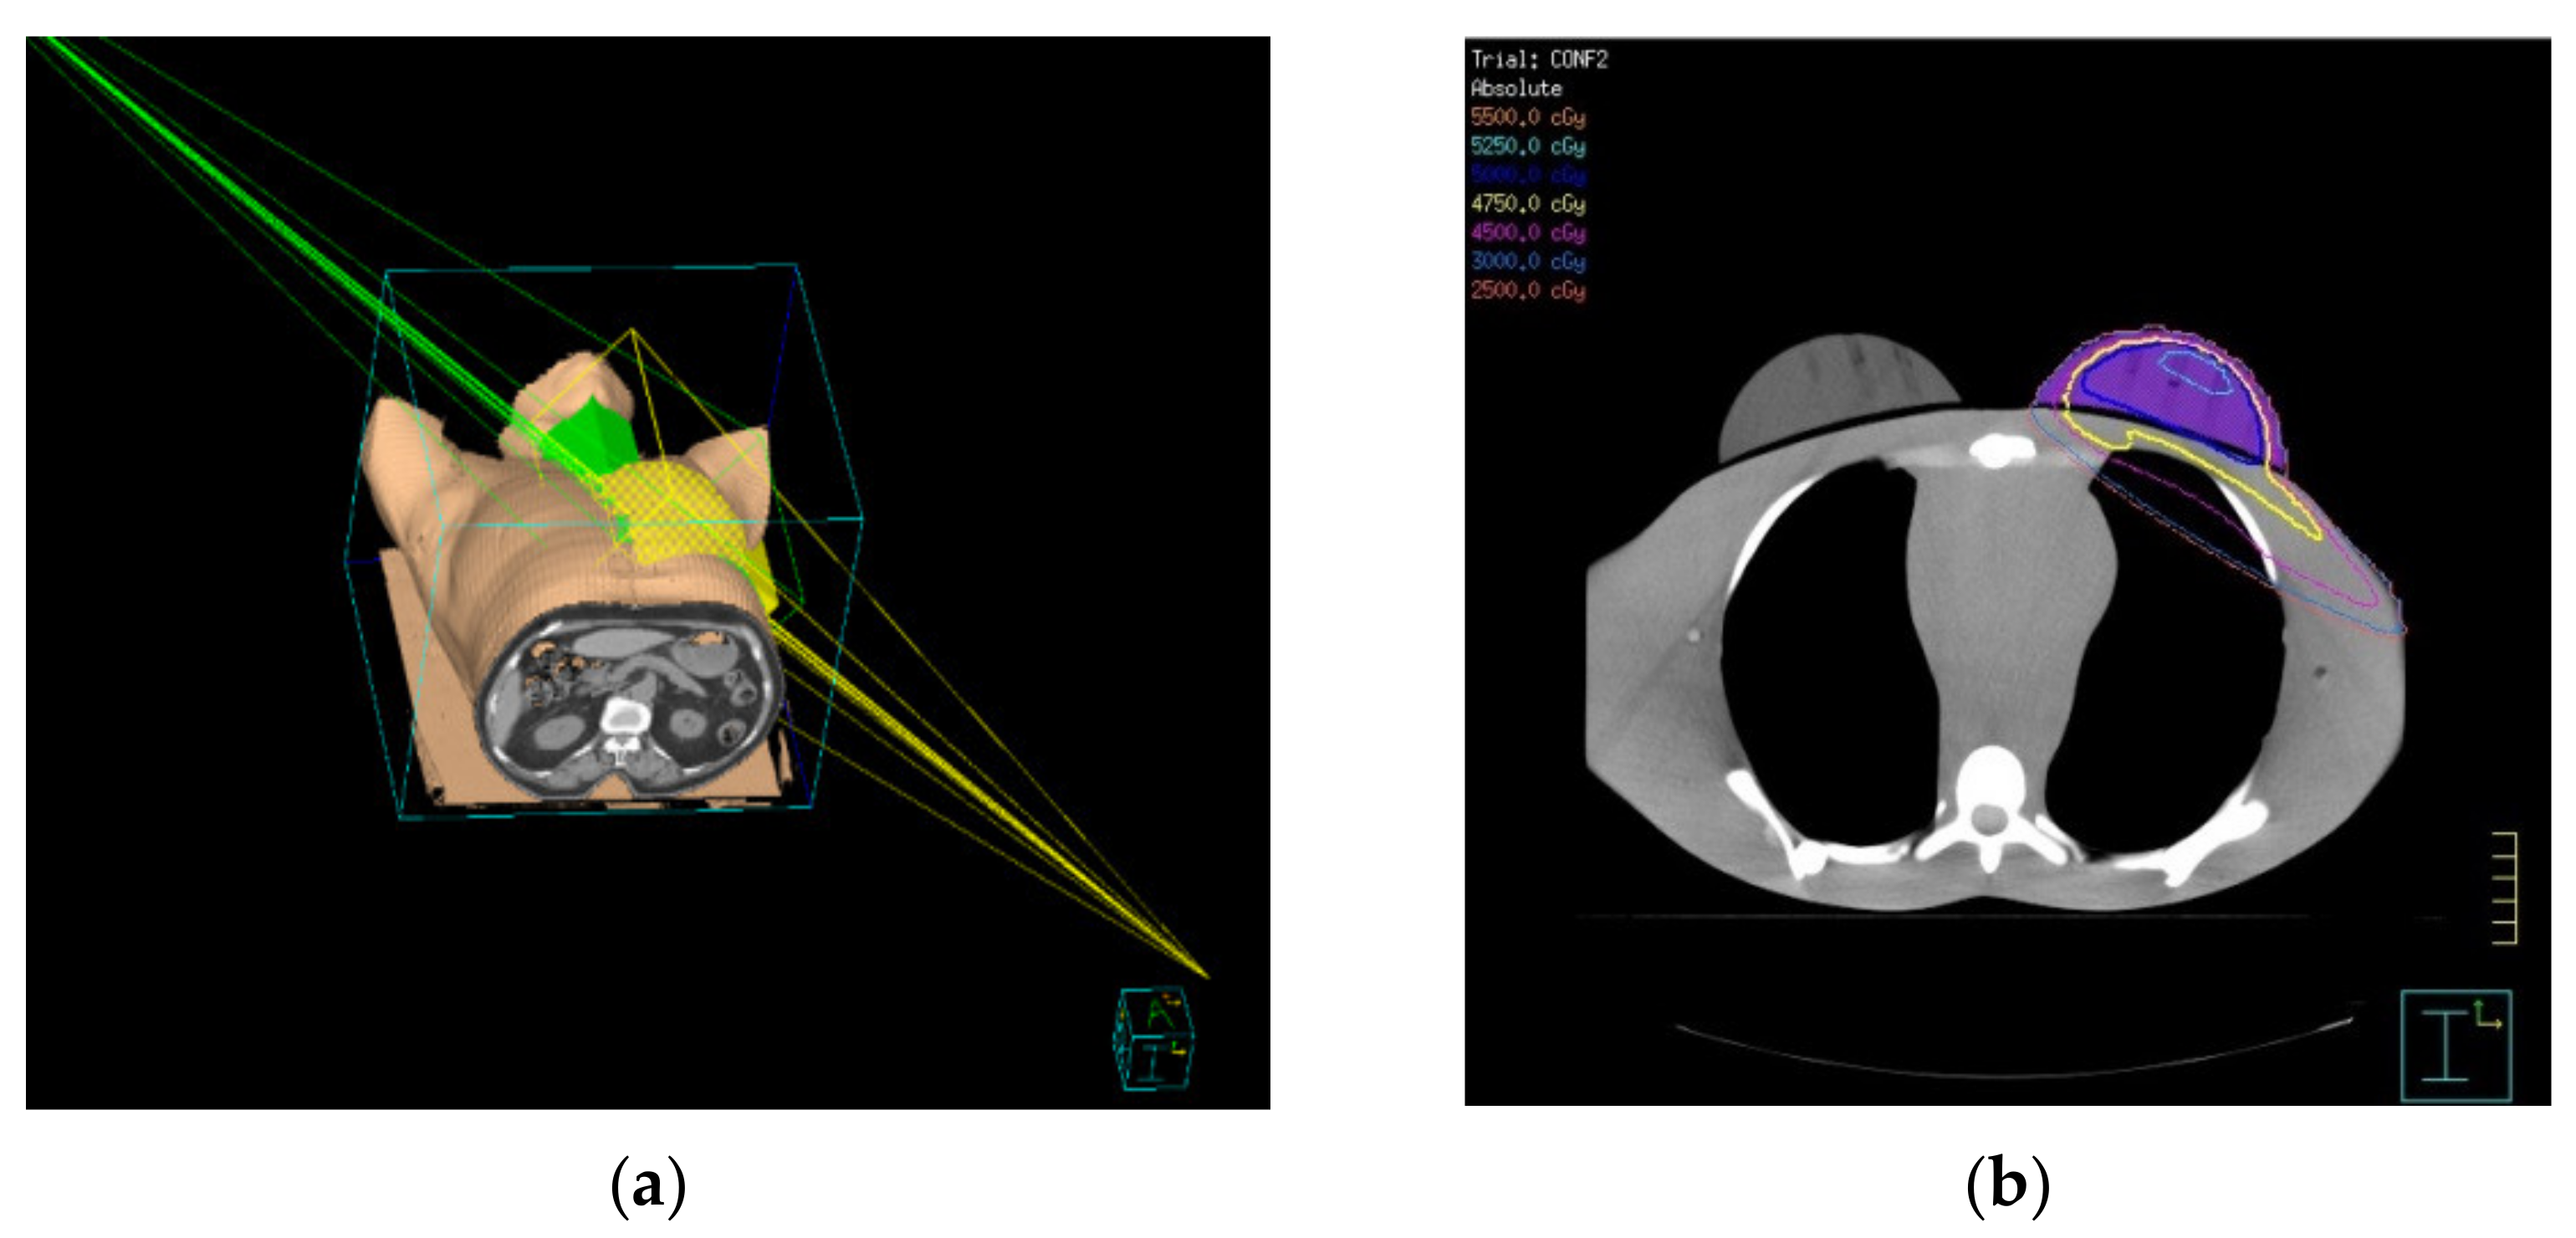 Breast volumes of human subjects in three scanning positions